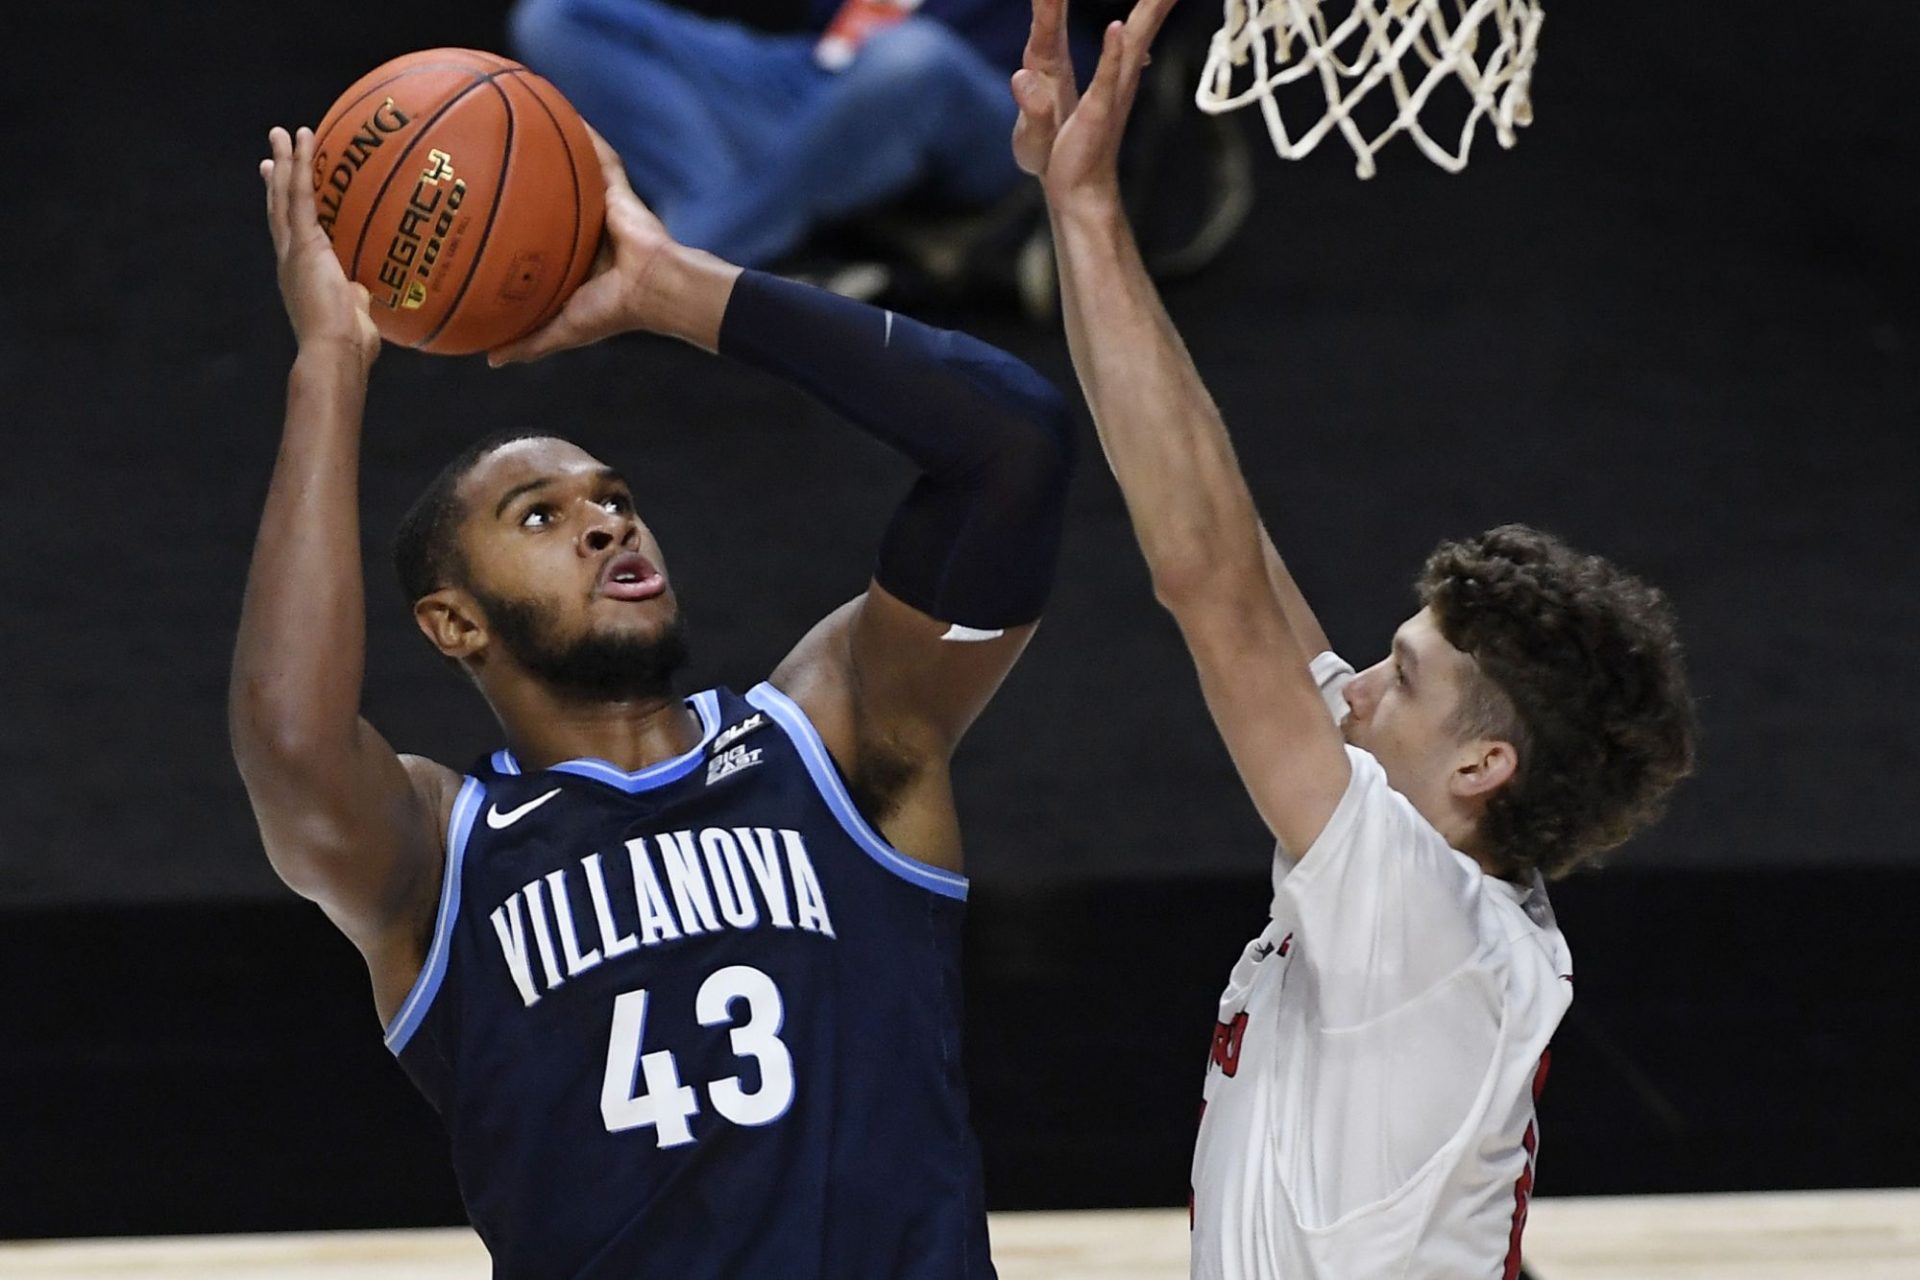 College hoops motivate at MSG with Villanova-Virginia on Dec. 19